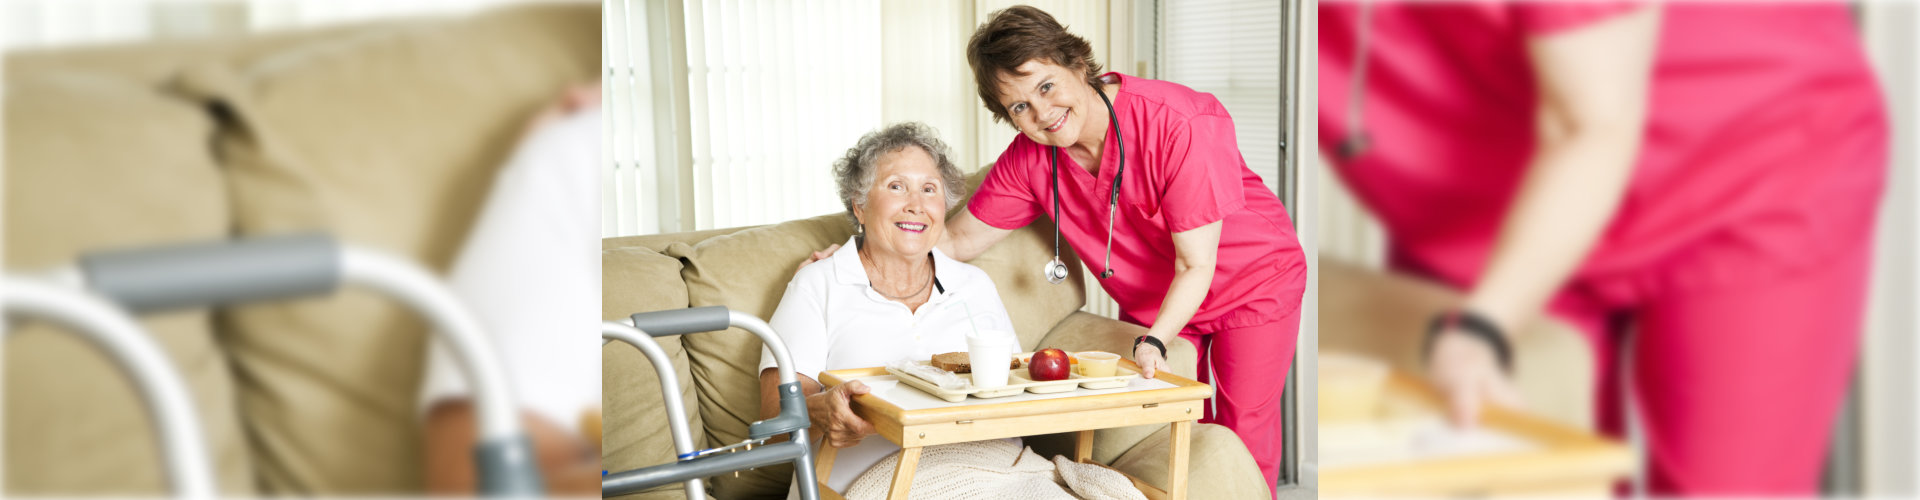 caregiver and senior with food tray